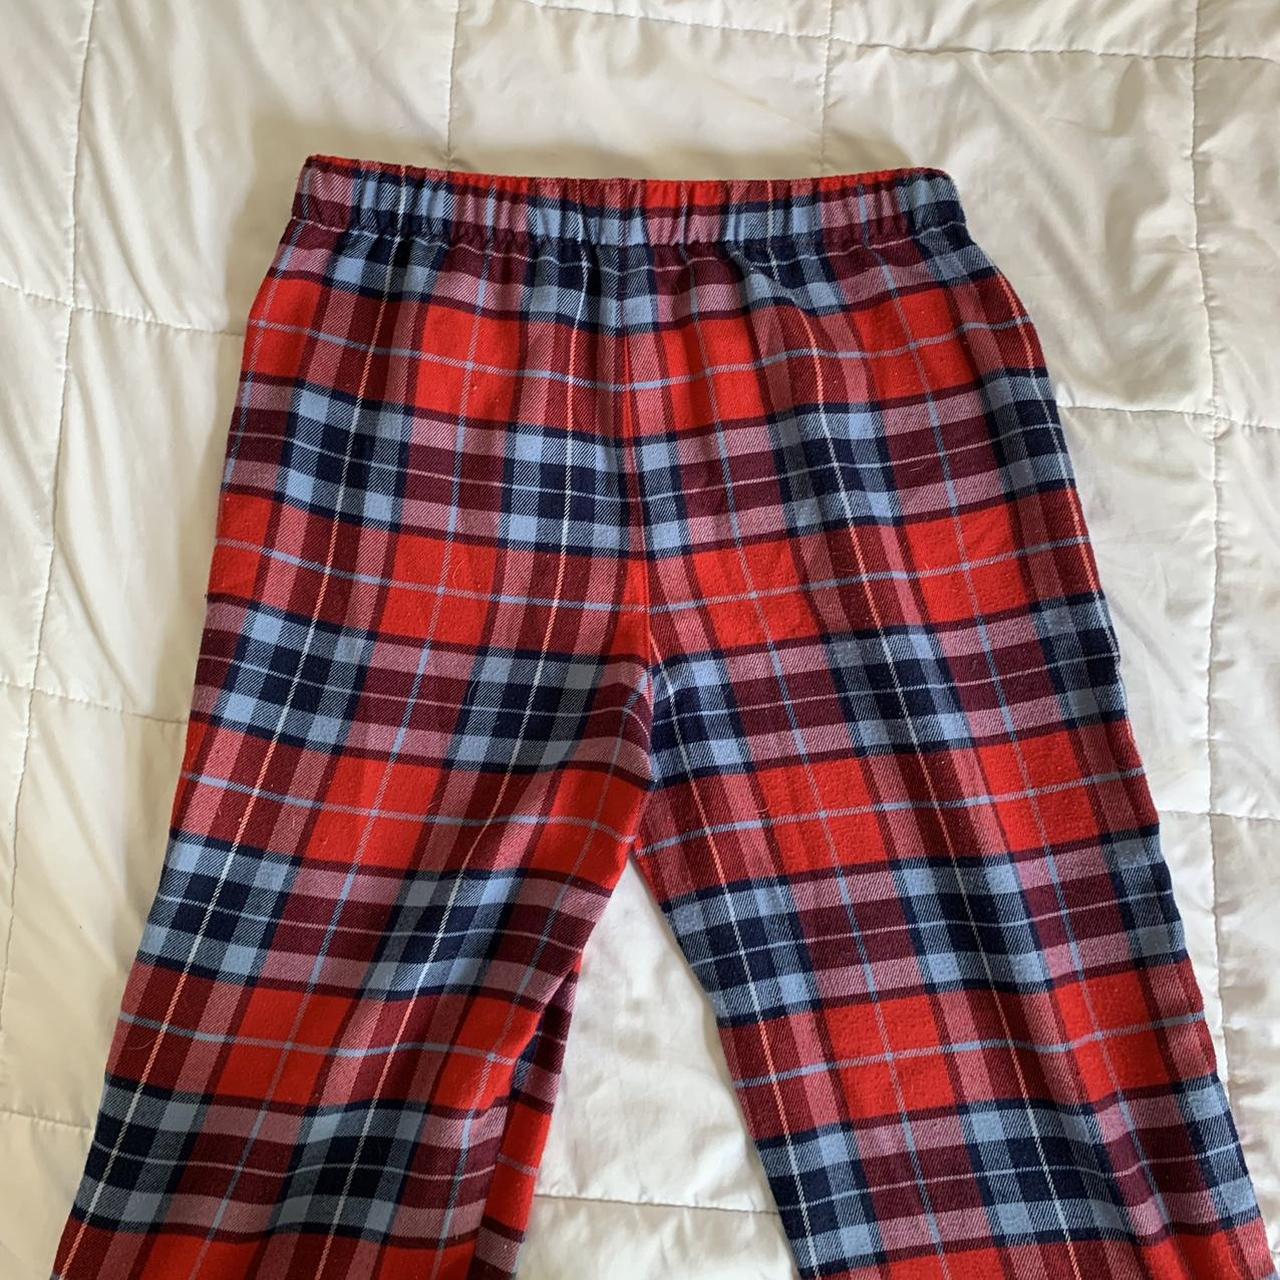 Lands' End Women's Blue and Red Pajamas | Depop